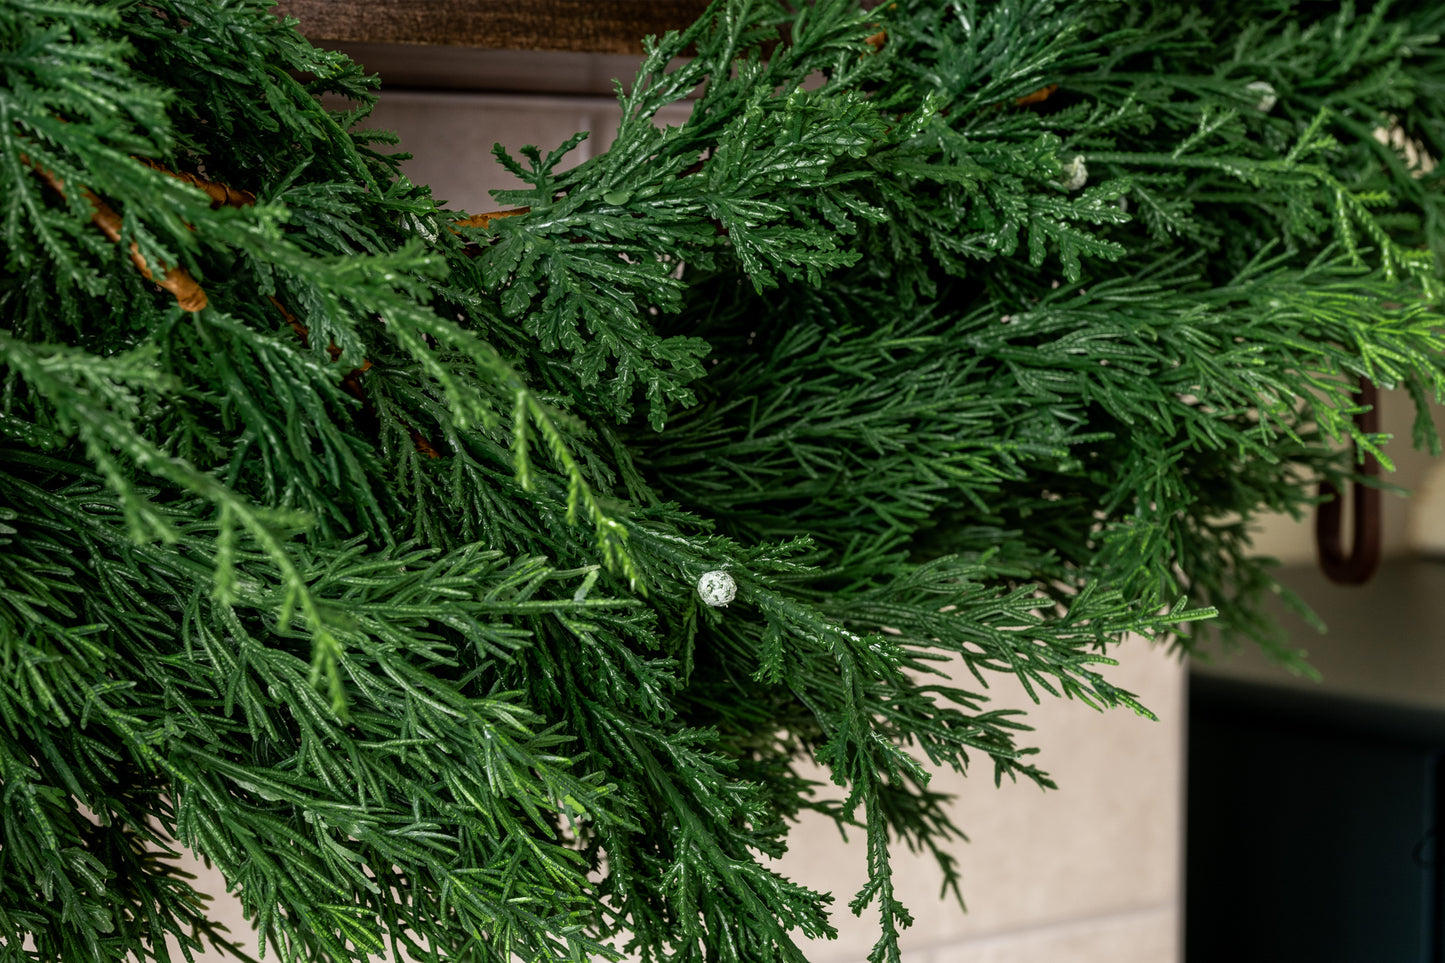 Winter berry juniper garland close up featuring mixed greenery and berry look for holiday decorating.